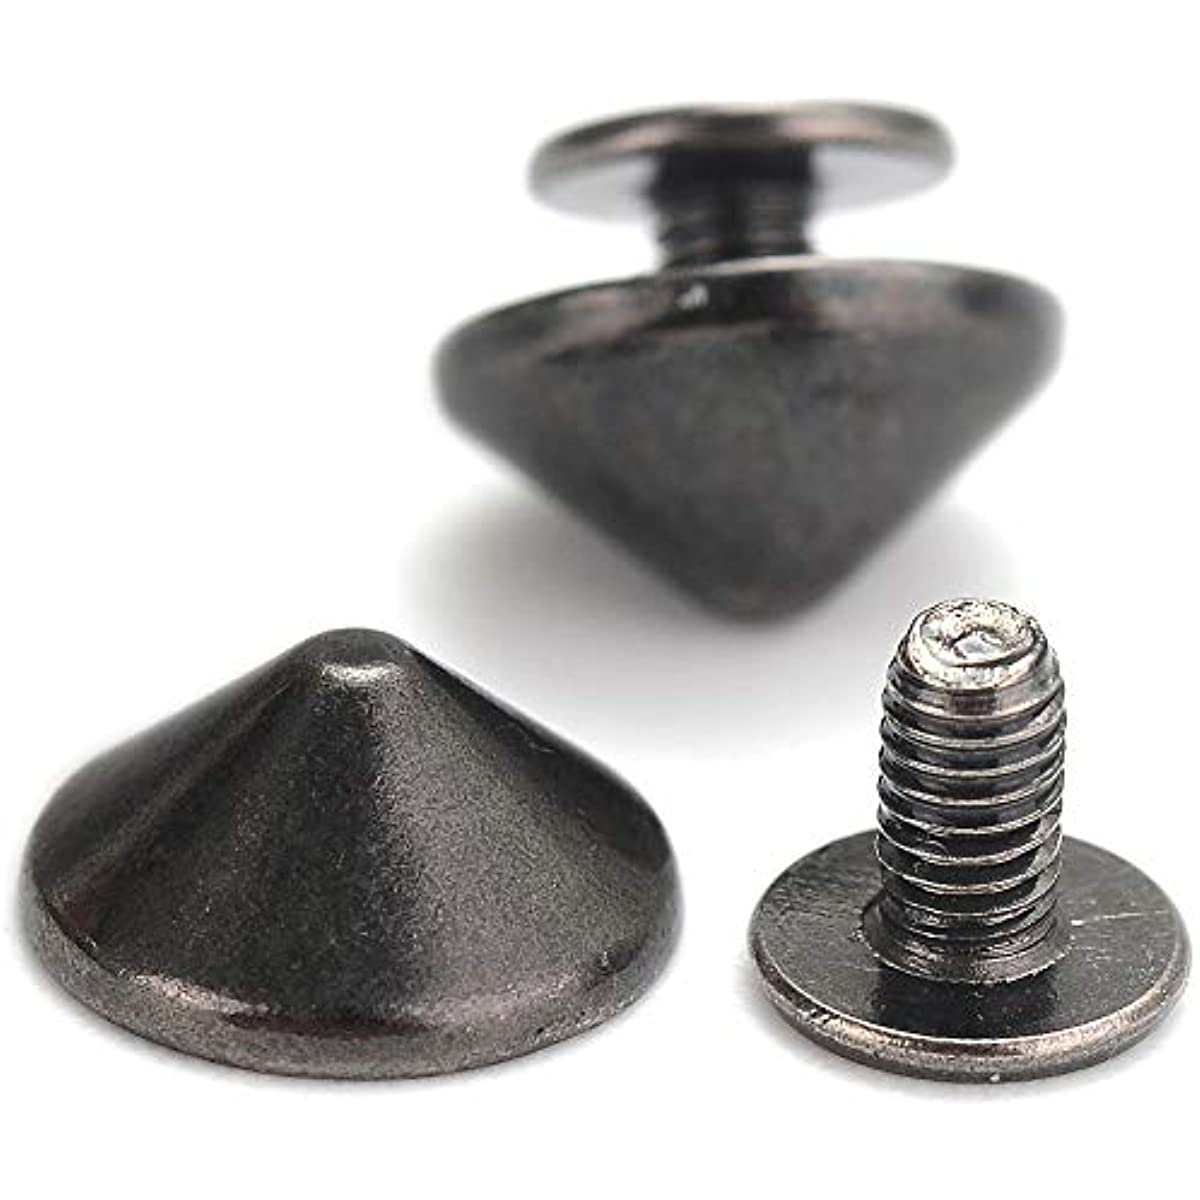  170 Pieces Multiple Sizes Cone Spikes Screwback Studs